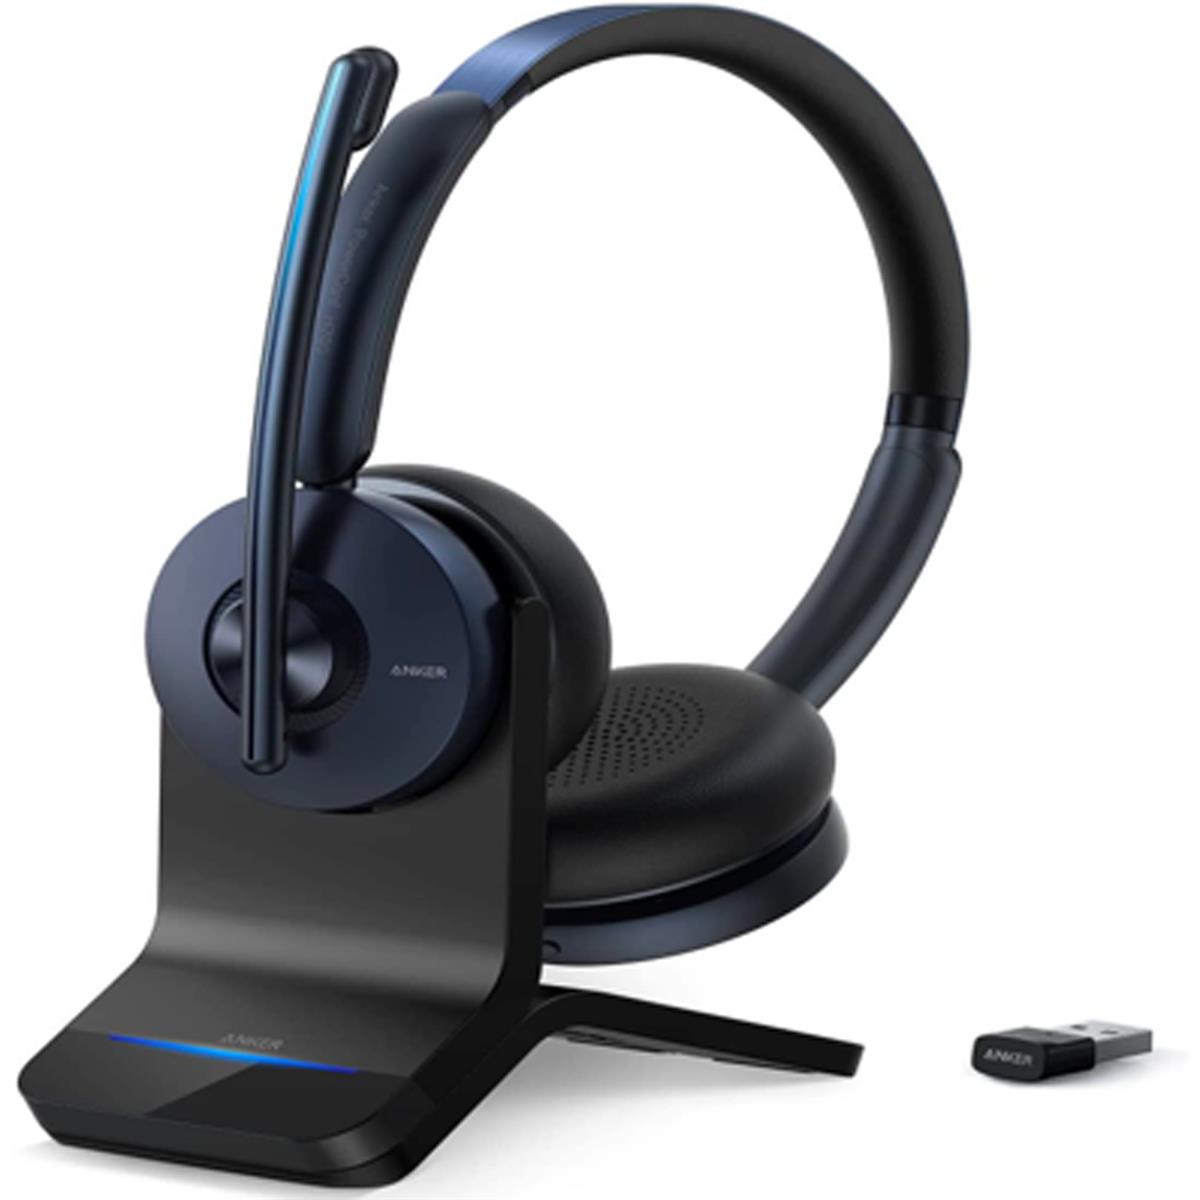 Image of Anker Powerconf H700 Wireless Headset